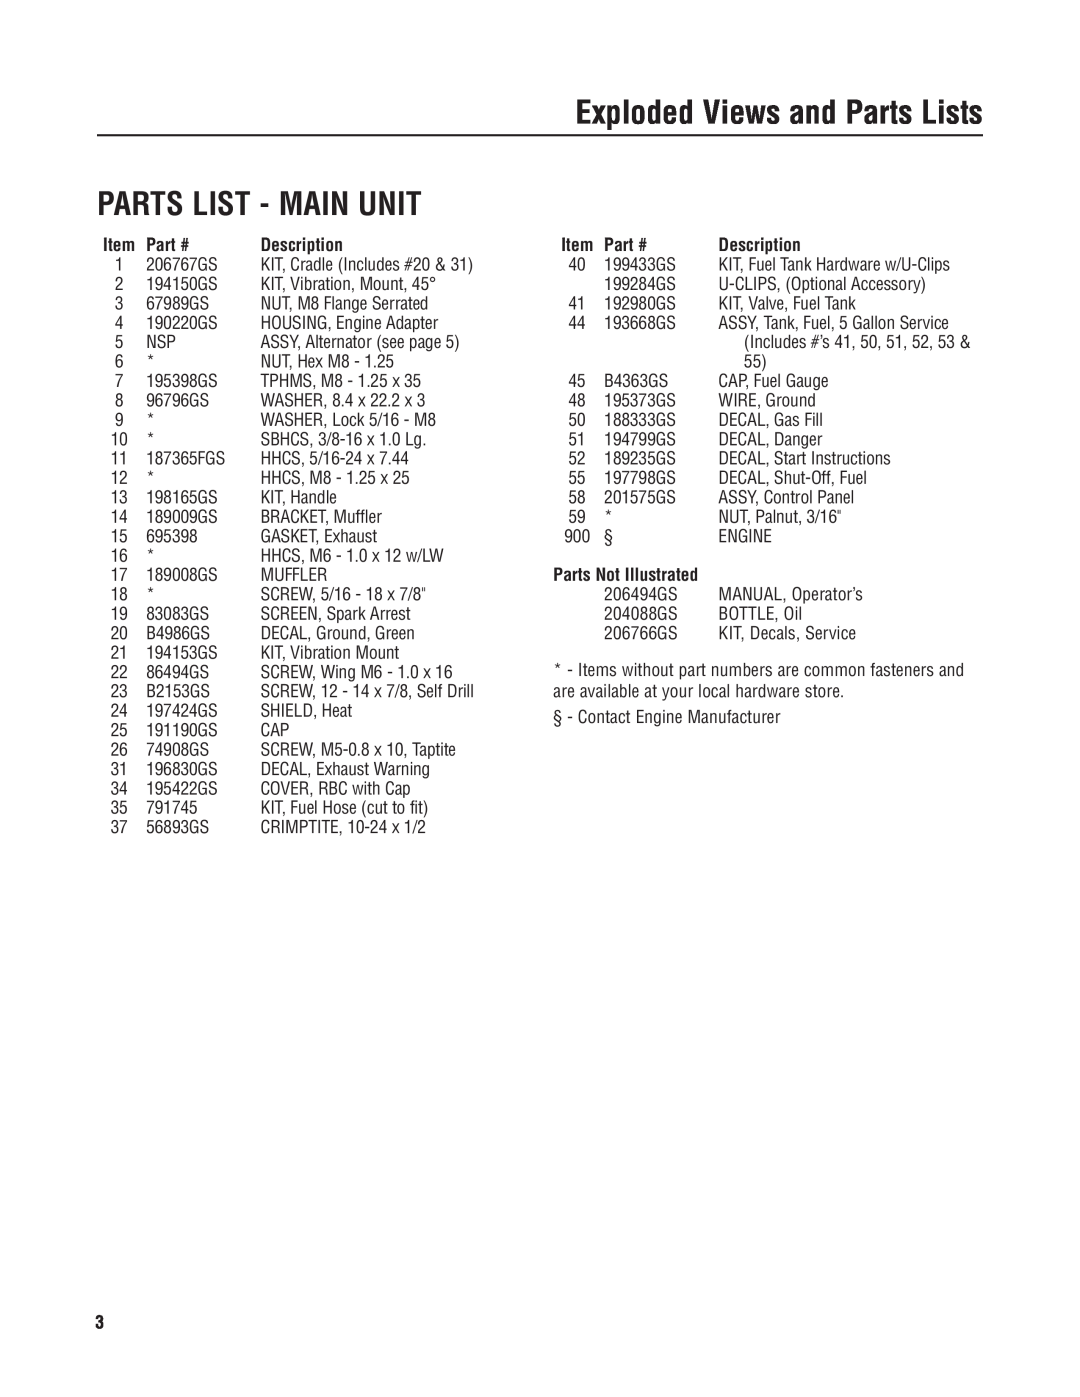 Briggs & Stratton 30424 manual Parts List - Main Unit, Description, Parts Not Illustrated, Exploded Views and Parts Lists 